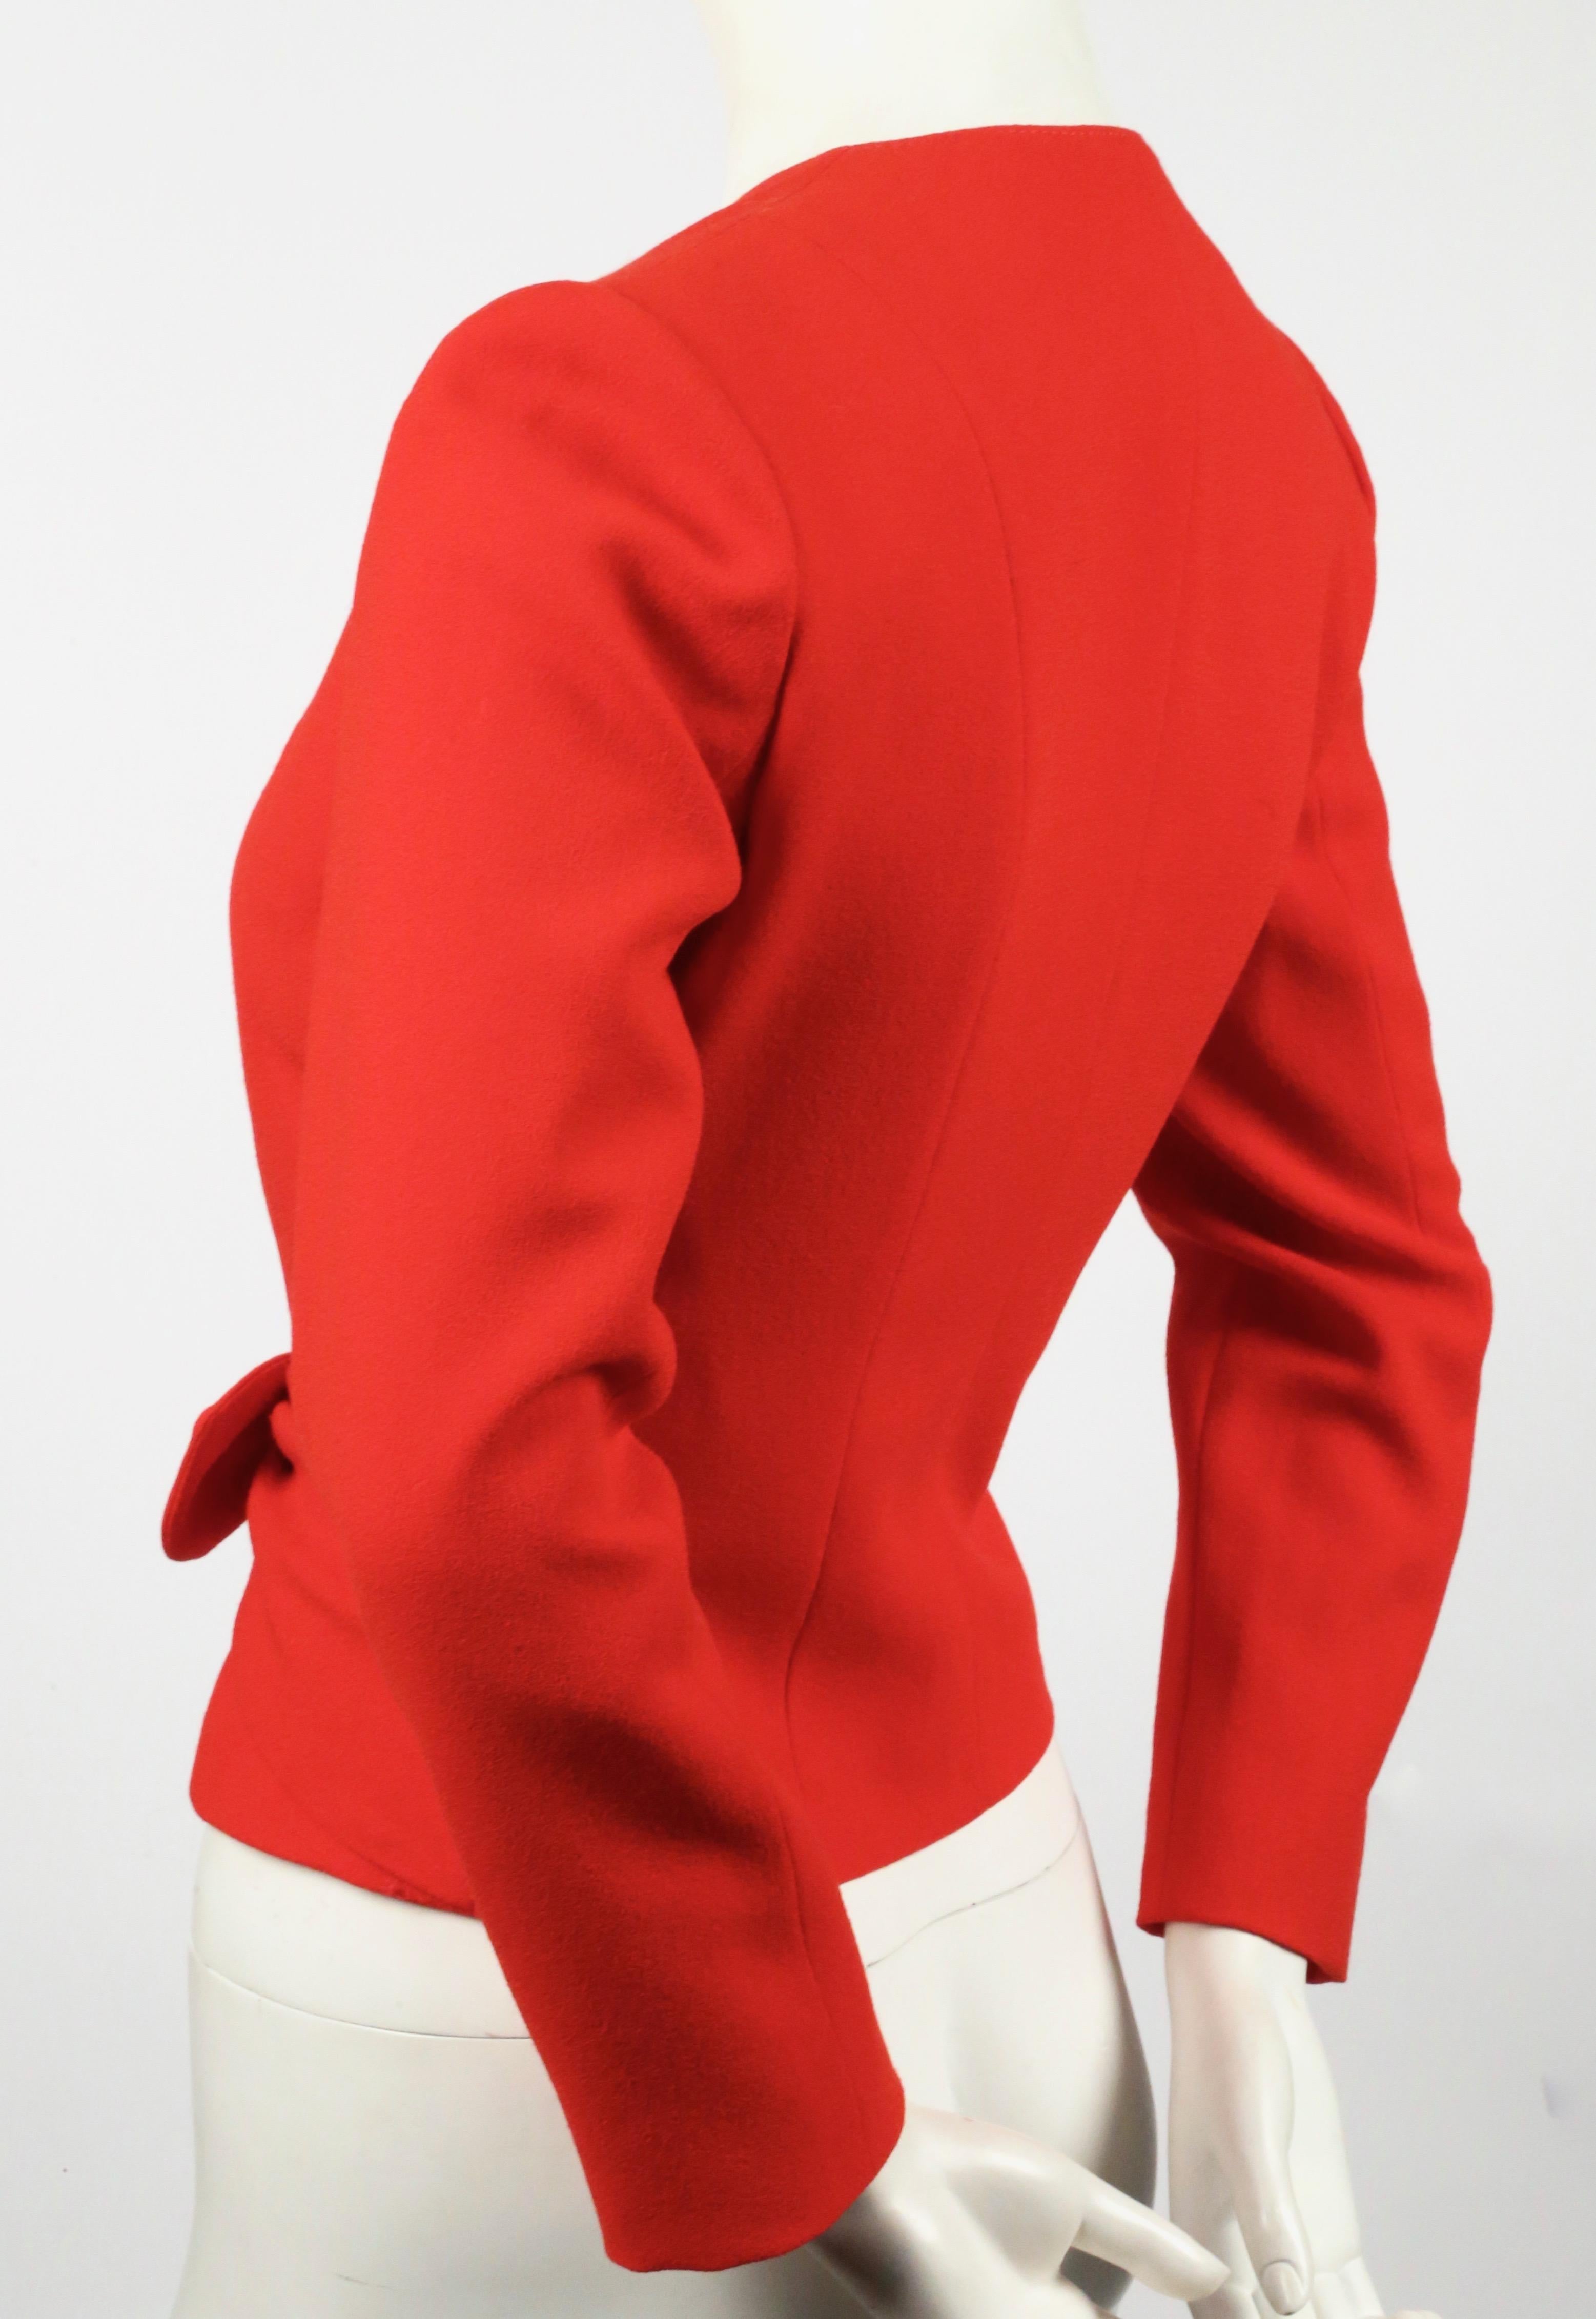 Fitted red, wool jacket with tie accented sash half-belt designed by Valentino dating to the late 1990's, early 2000's. U.S. size 6. Approximate measurements: 15